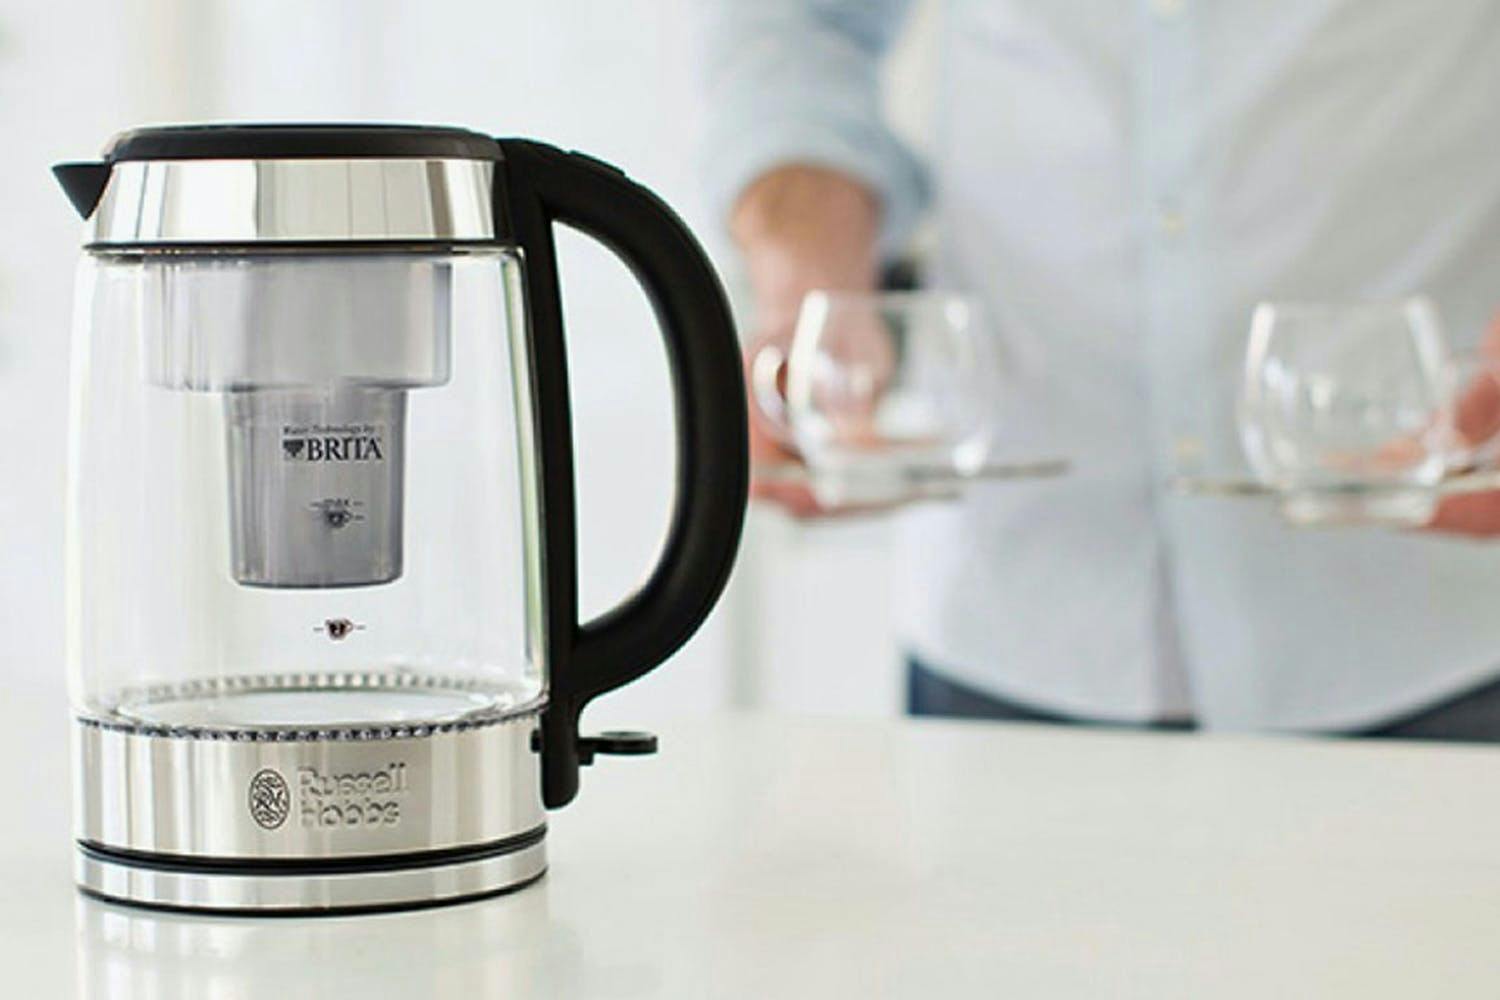 Russell Hobbs 18554 Brita Filter Purity Kettle Review & Demo 